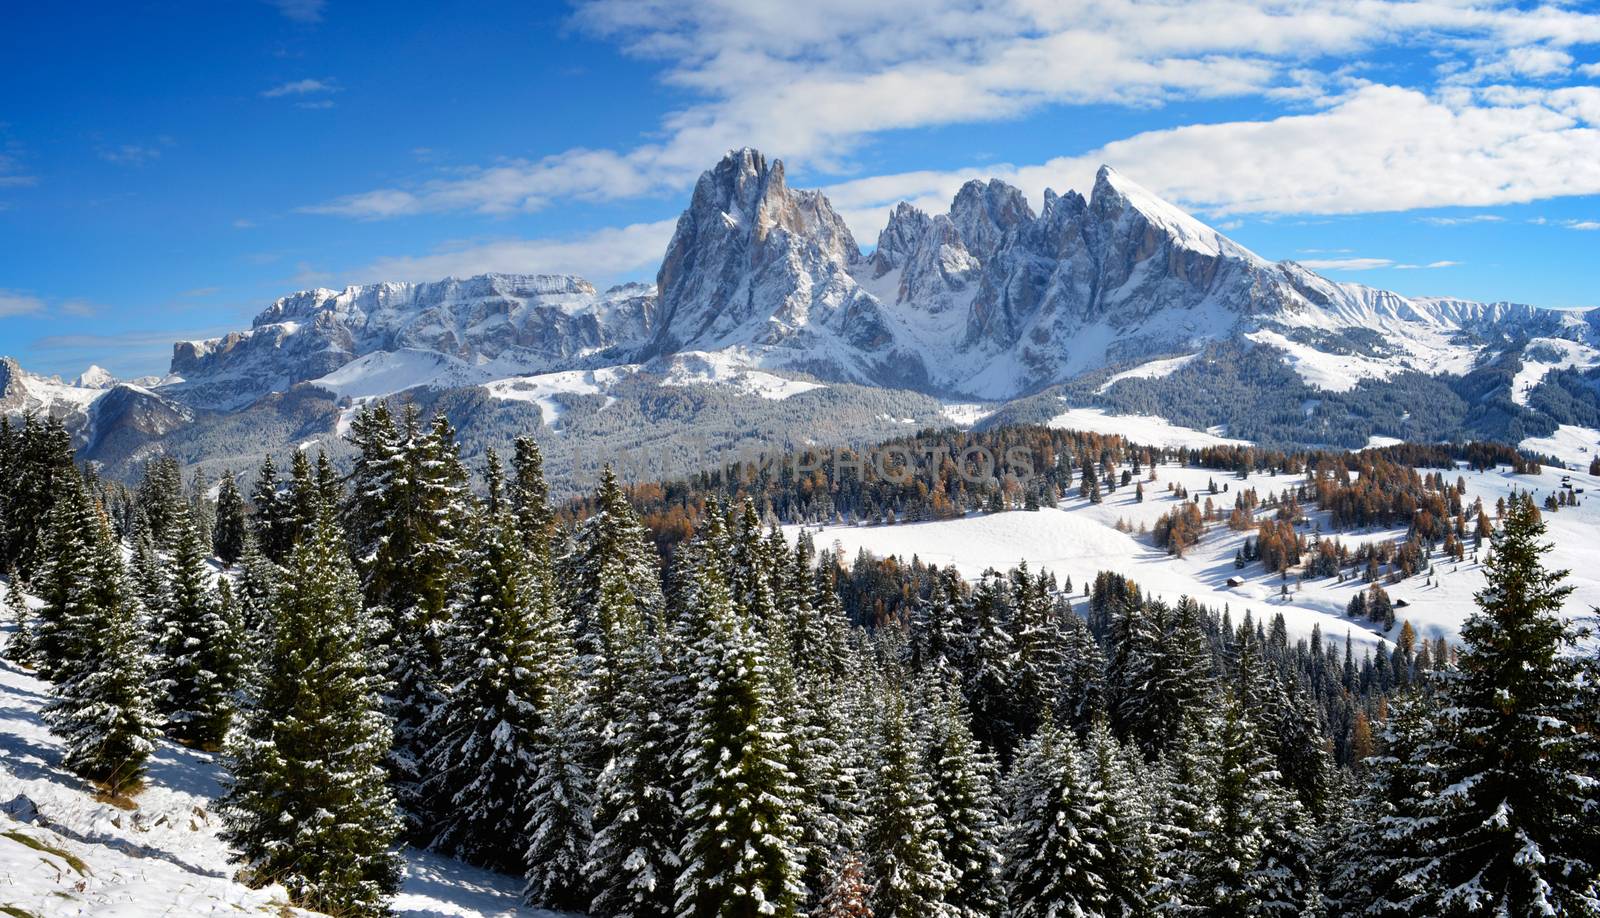 View on the Langkofel and Plattkofel (Sassolungo and Sassopiatto) dolomites mountains over the Alpe di Siusi or Seiser Alm in South Tyrol, Italy in winter.
